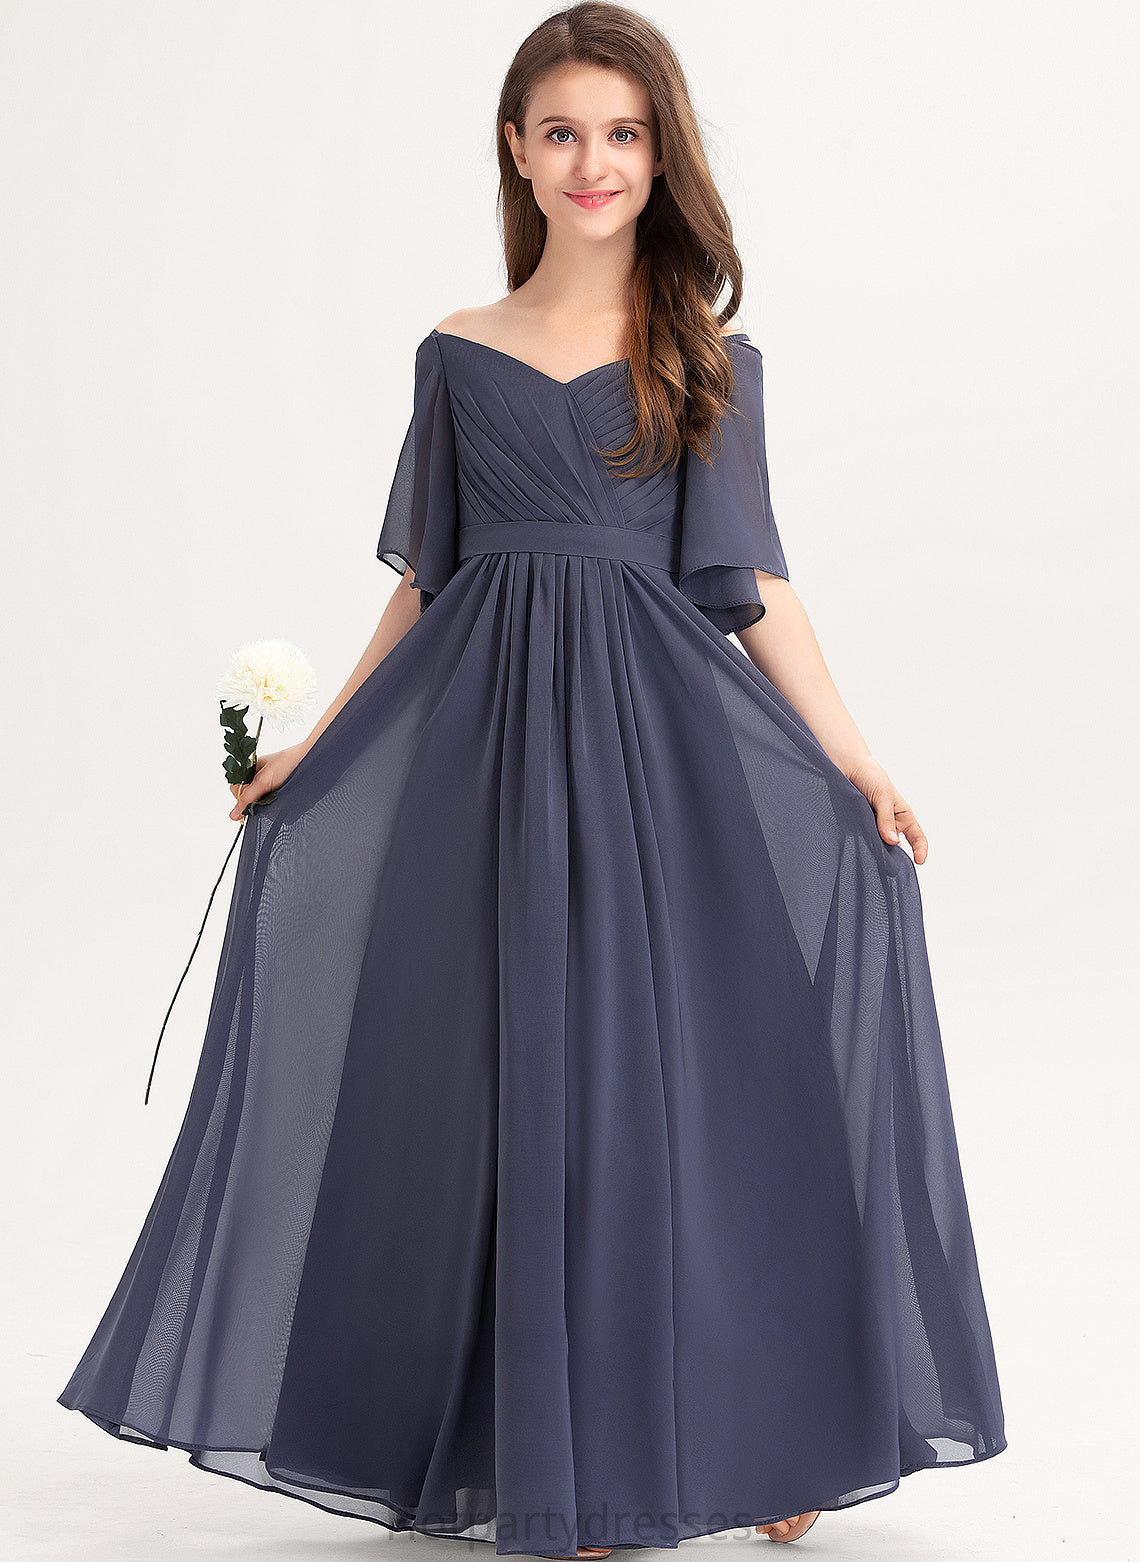 Ruffle Floor-Length Jaelyn Chiffon A-Line Off-the-Shoulder Junior Bridesmaid Dresses With Bow(s)